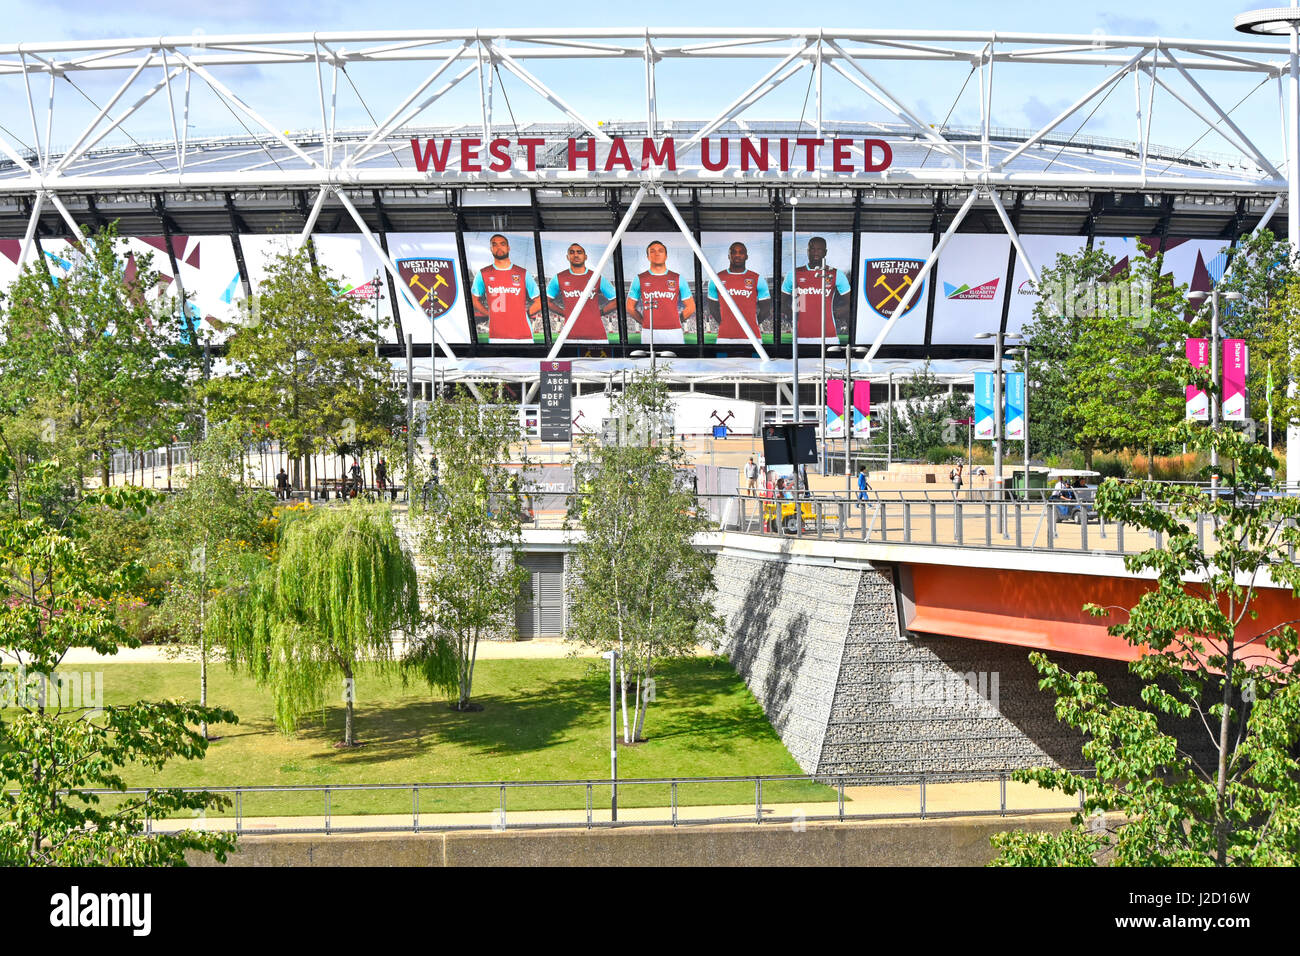 Queen Elizabeth Olympic Park Stratford Newham London England UK lawn & tree riverside landscaping in front of converted 2012 Olympic West Ham stadium Stock Photo